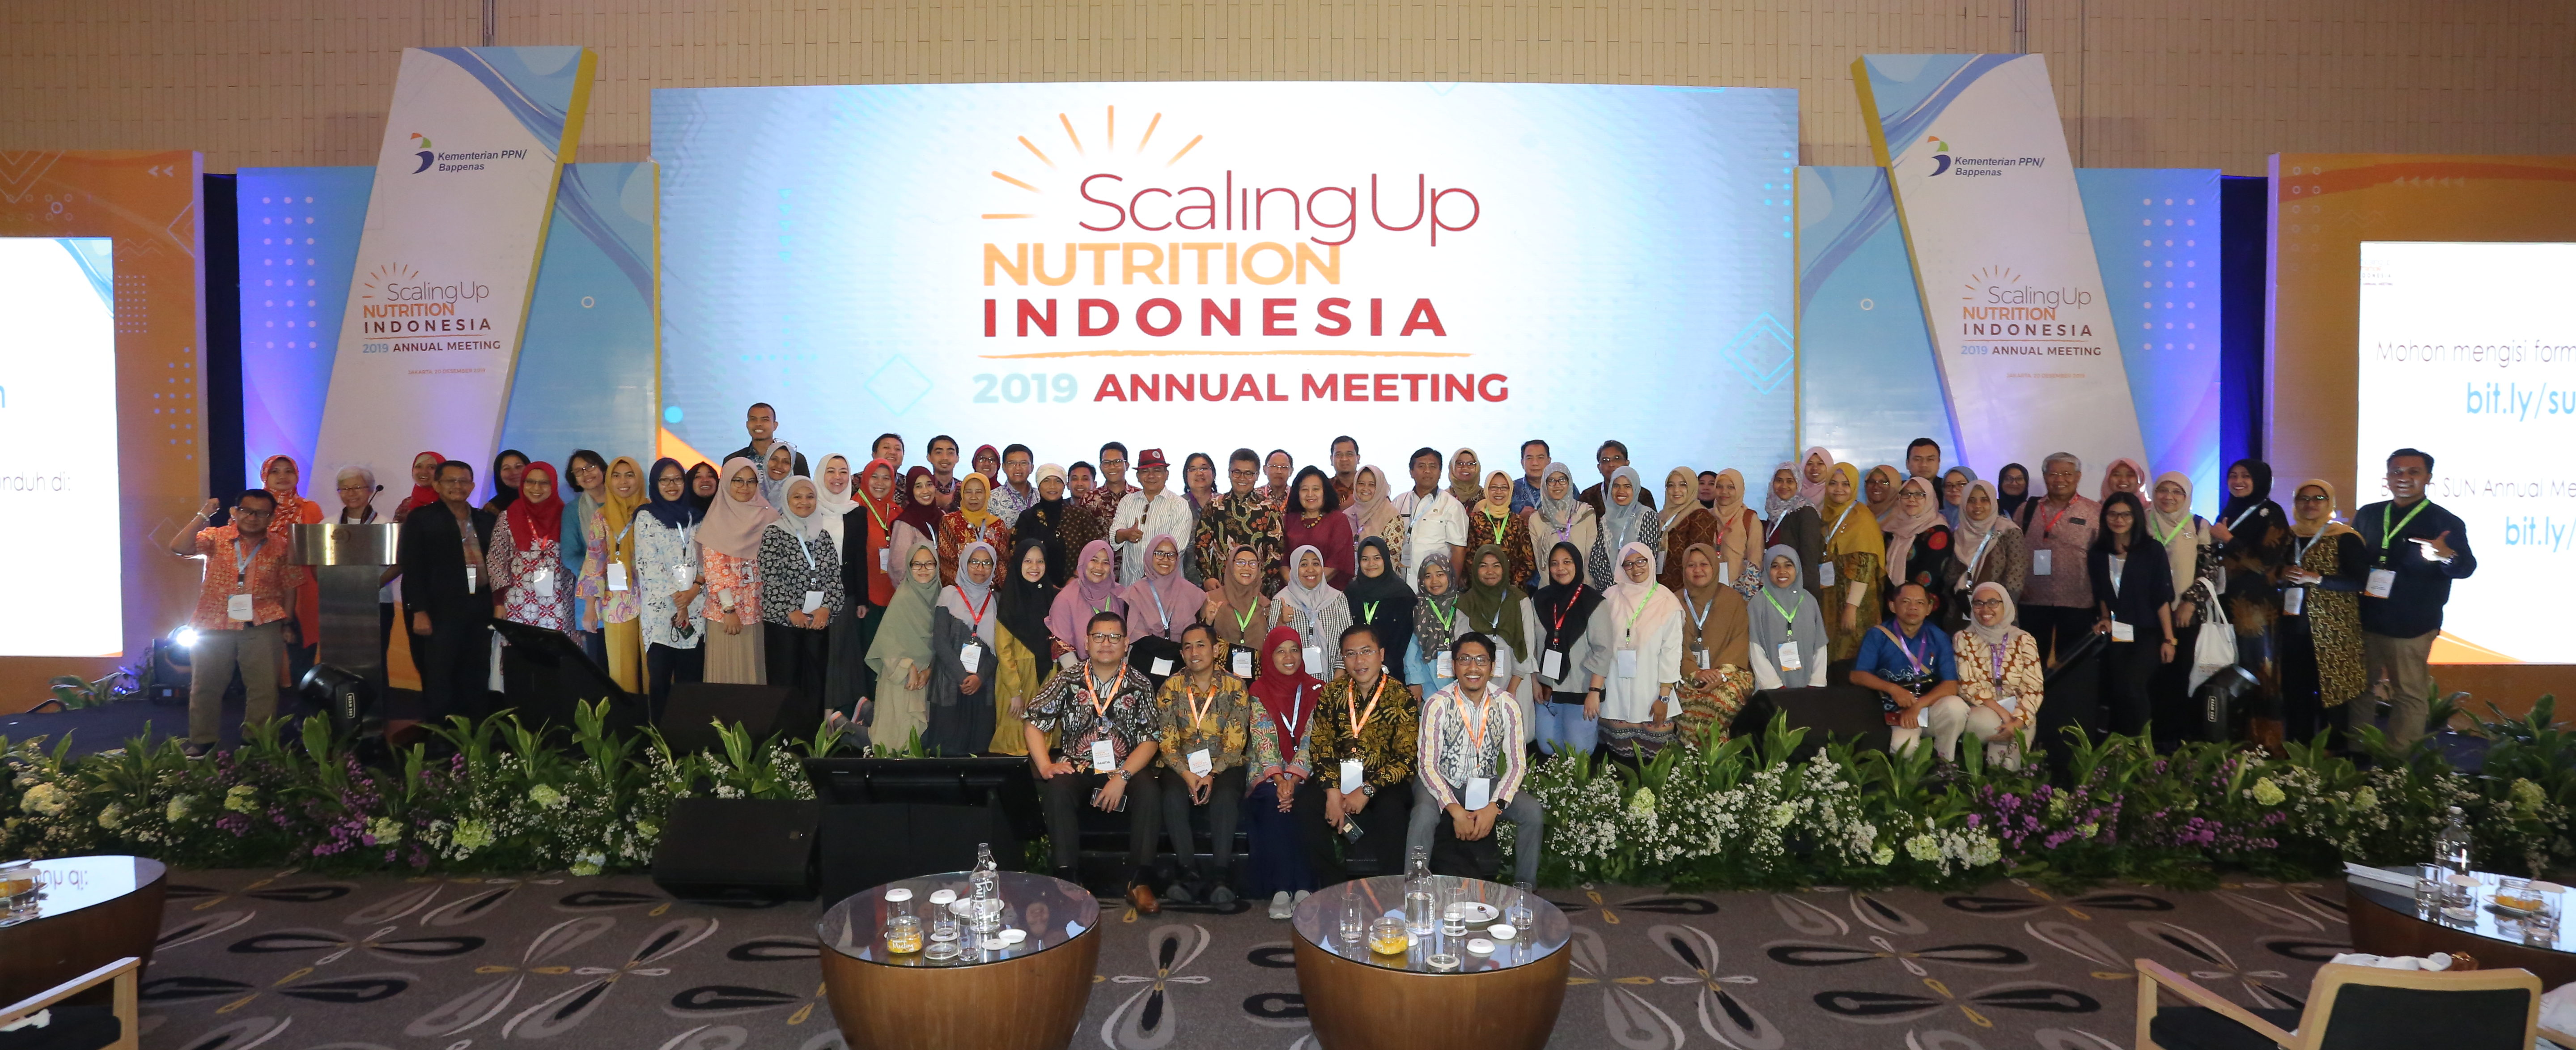 Multisector and multistakeholder effort on stunting reduction in Indonesia